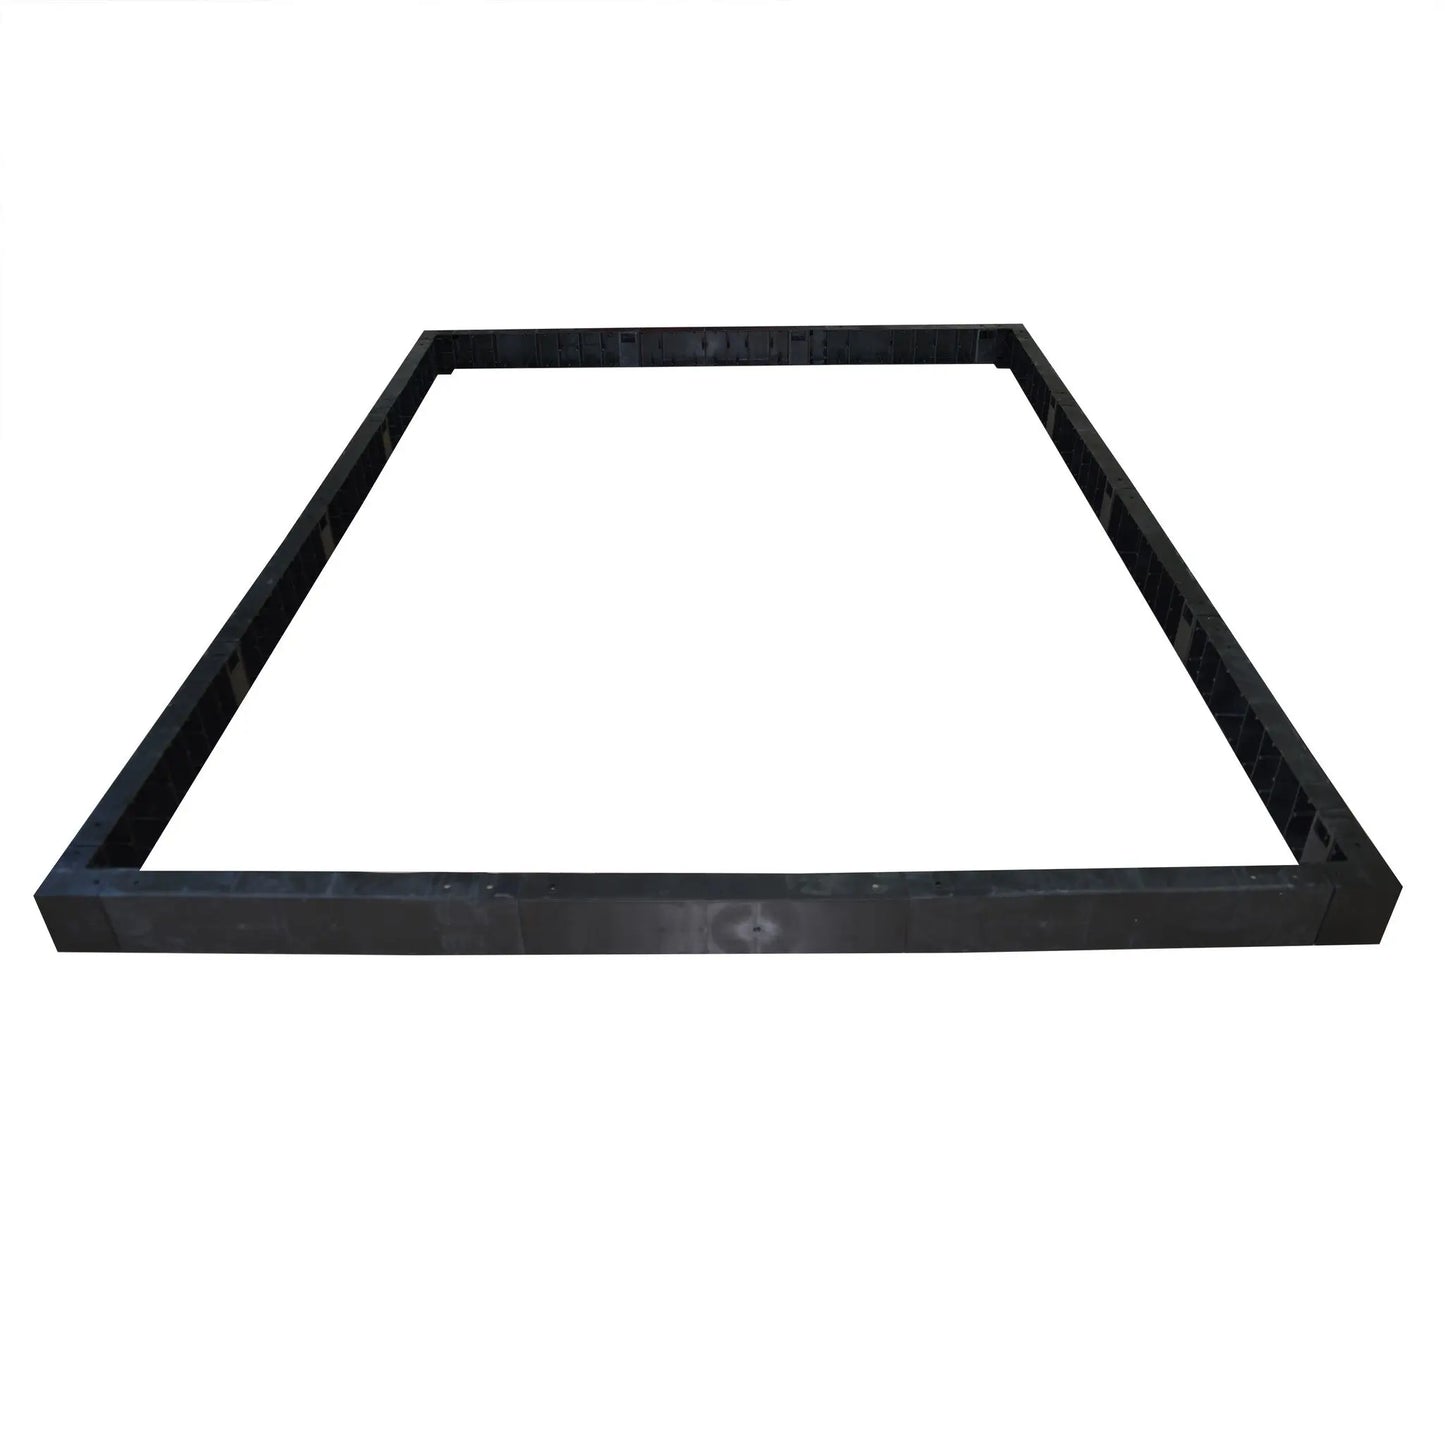 Mounting Base Kit 8x16 for Grand & Prestige Greenhouses Mounting Base Kits Canopia by Palram   